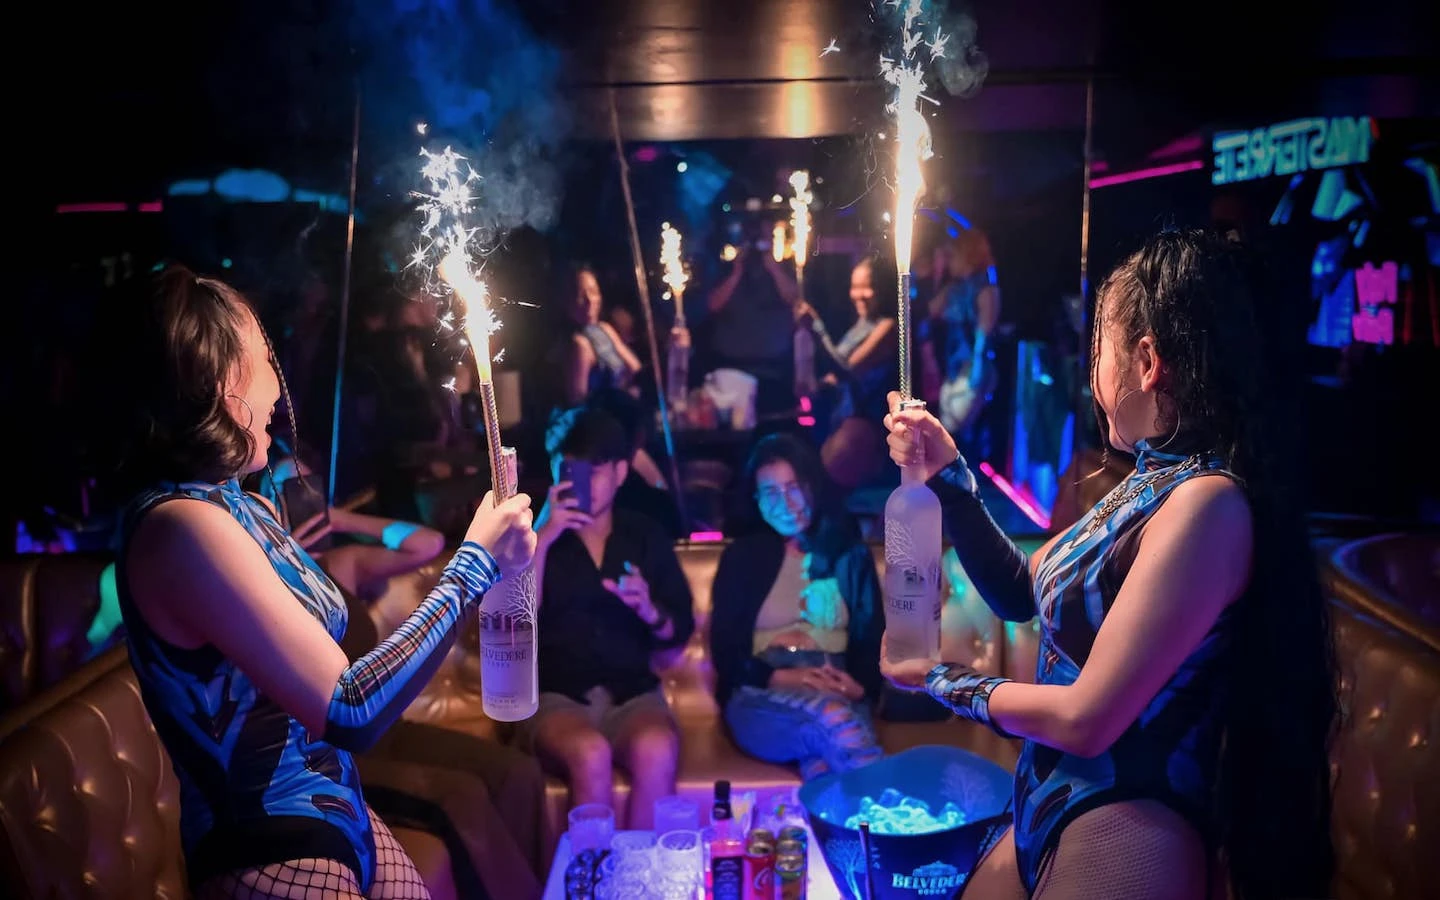 VIP service at the Foxy club in Bangkok with sexy models holding bottles with flares